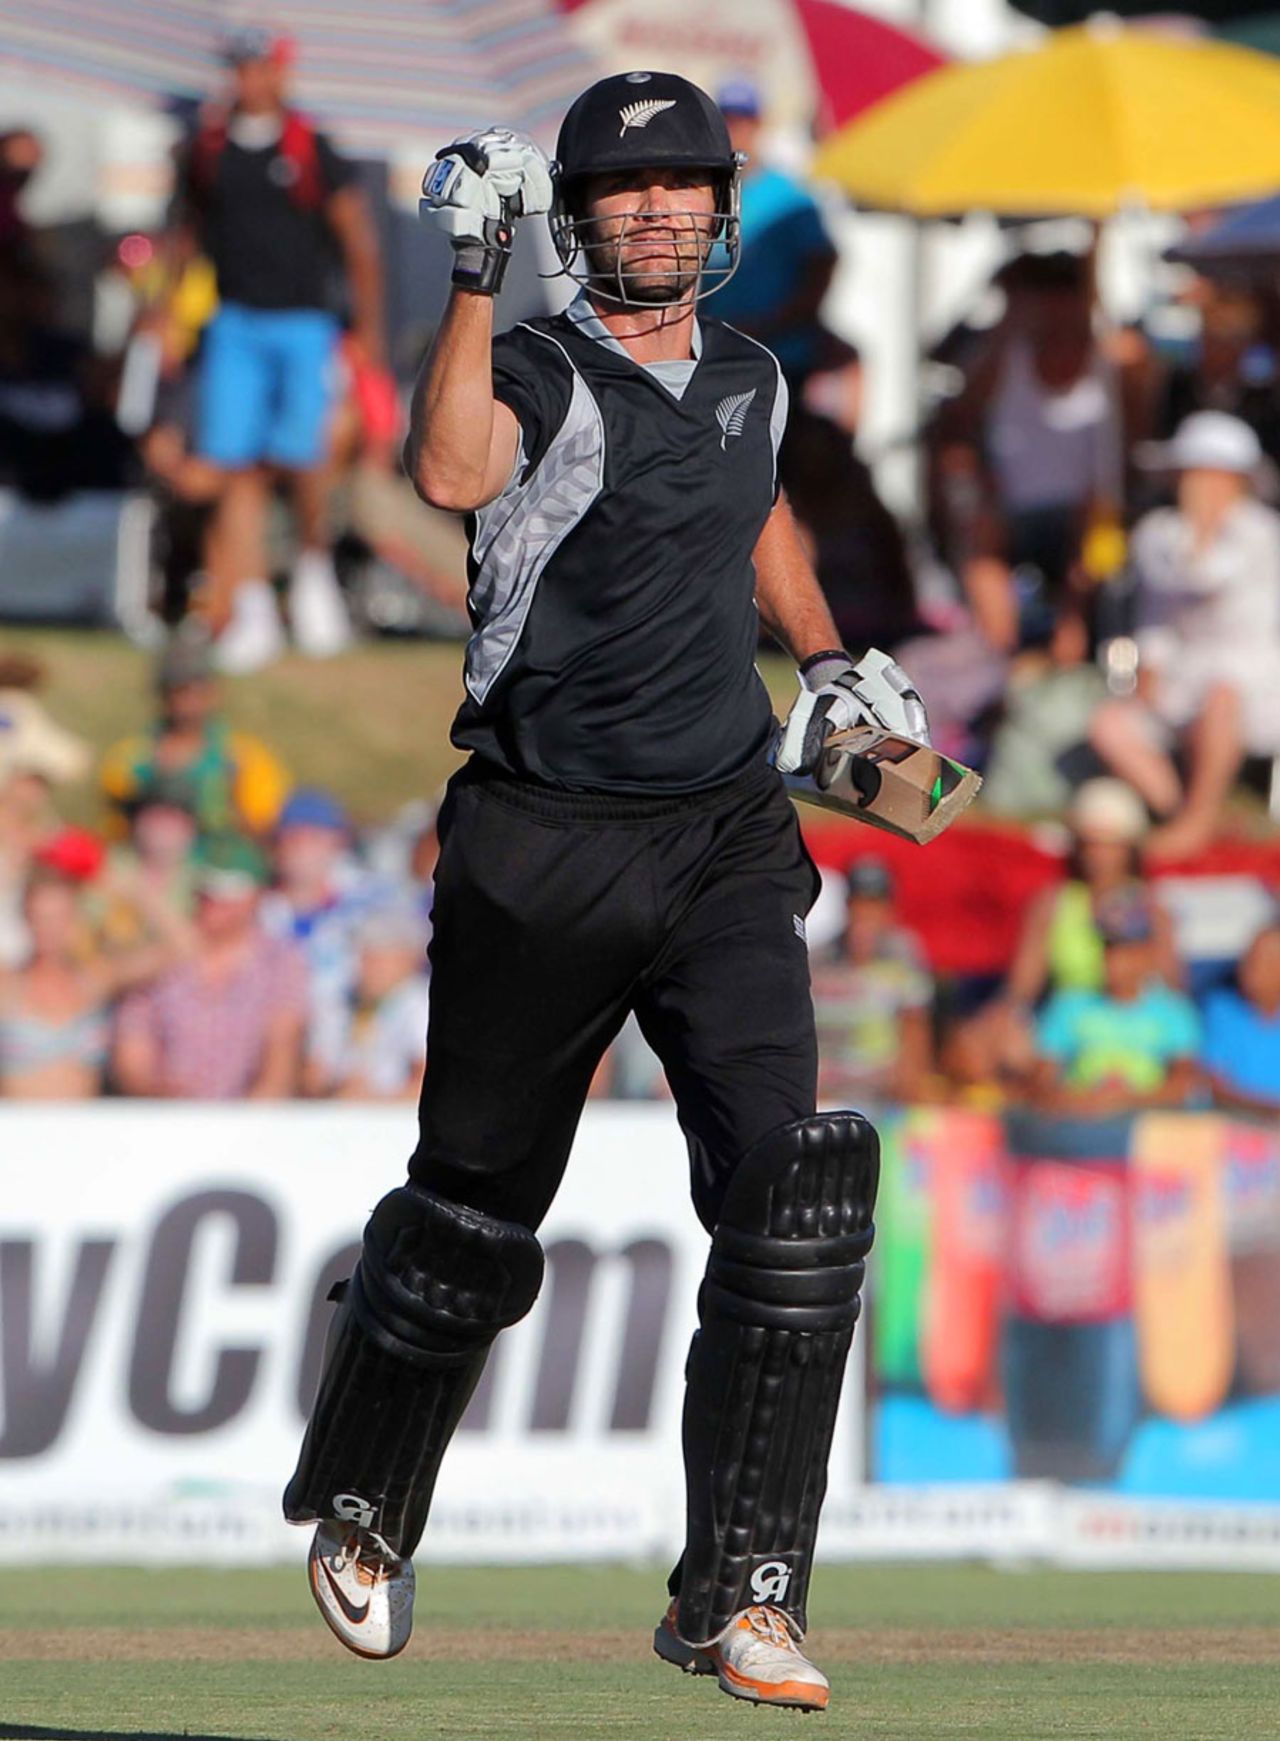 James Franklin punches the air after securing victory, South Africa v New Zealand, 1st ODI, Paarl, January 19, 2013